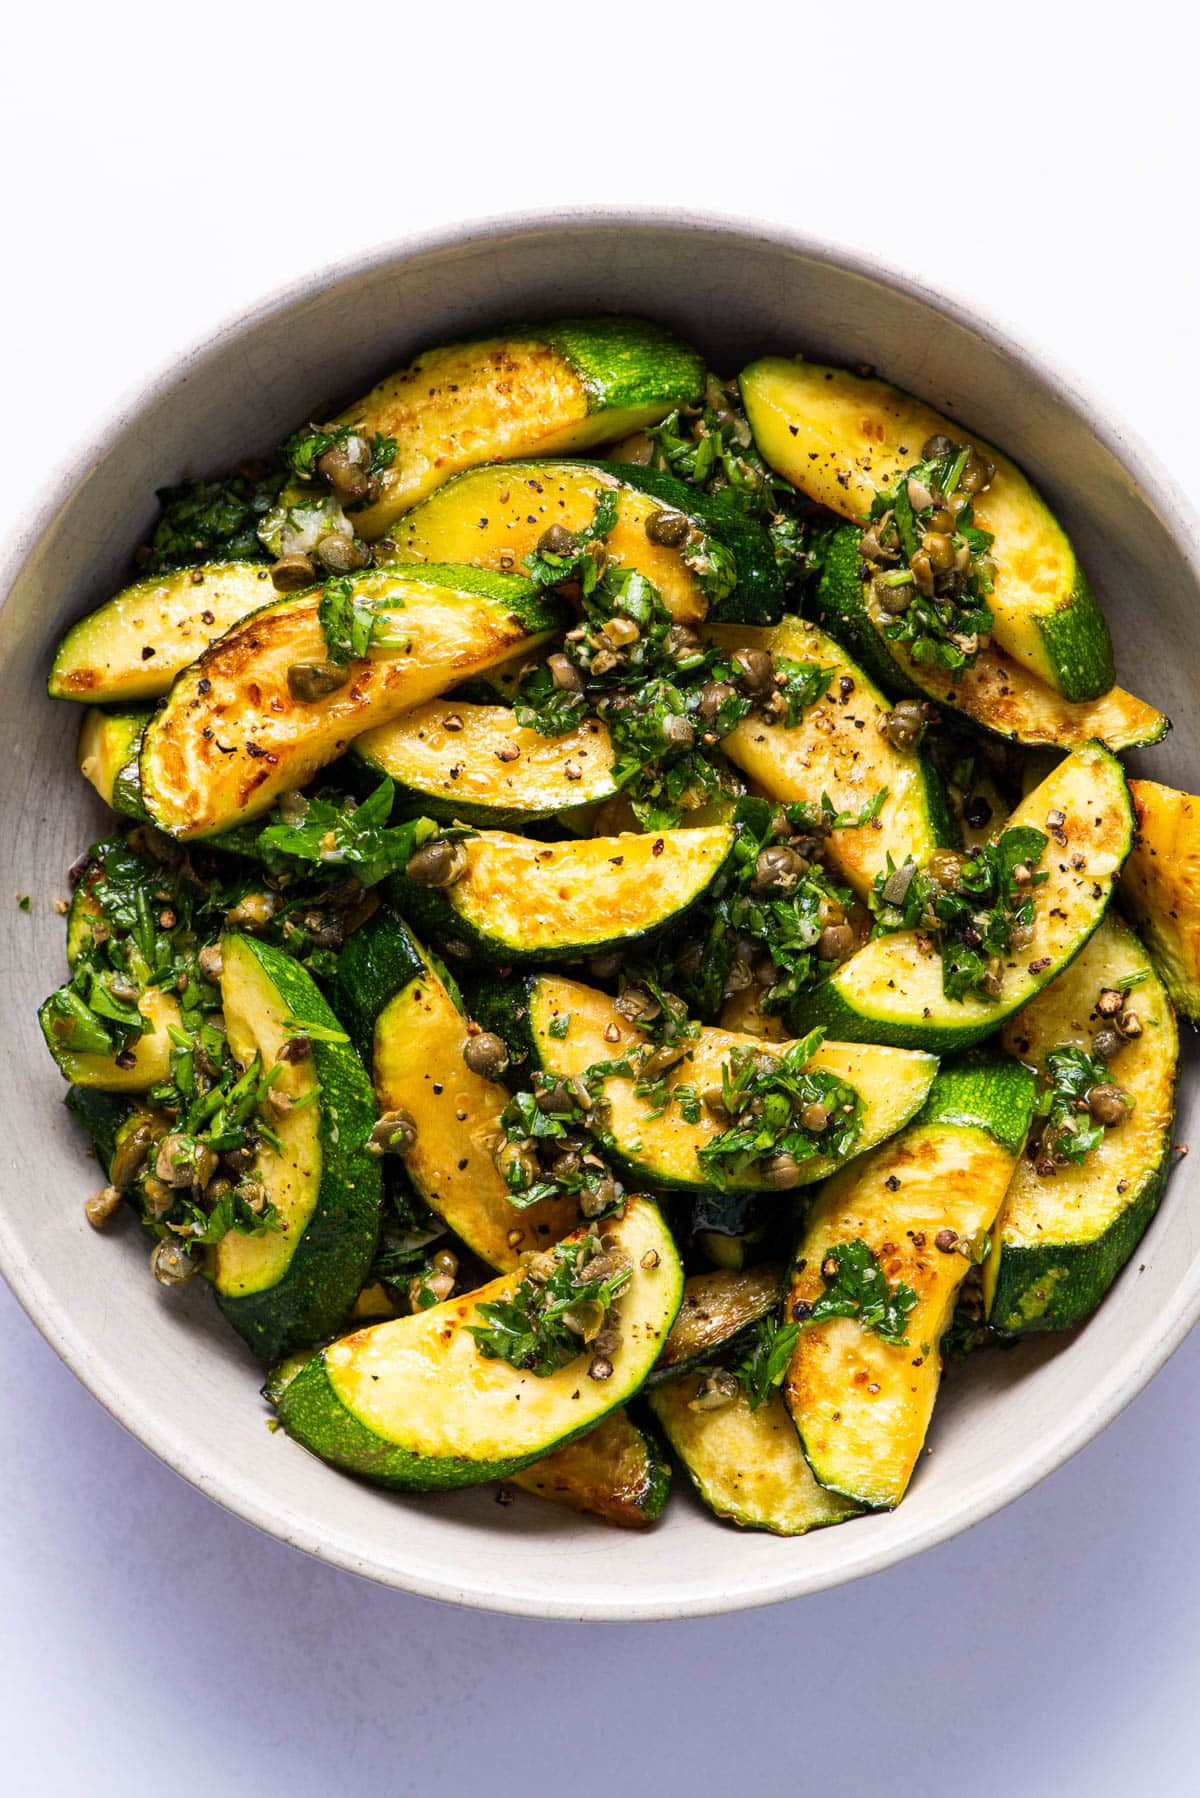 Pan-fried zucchini with caper relish in a bowl.